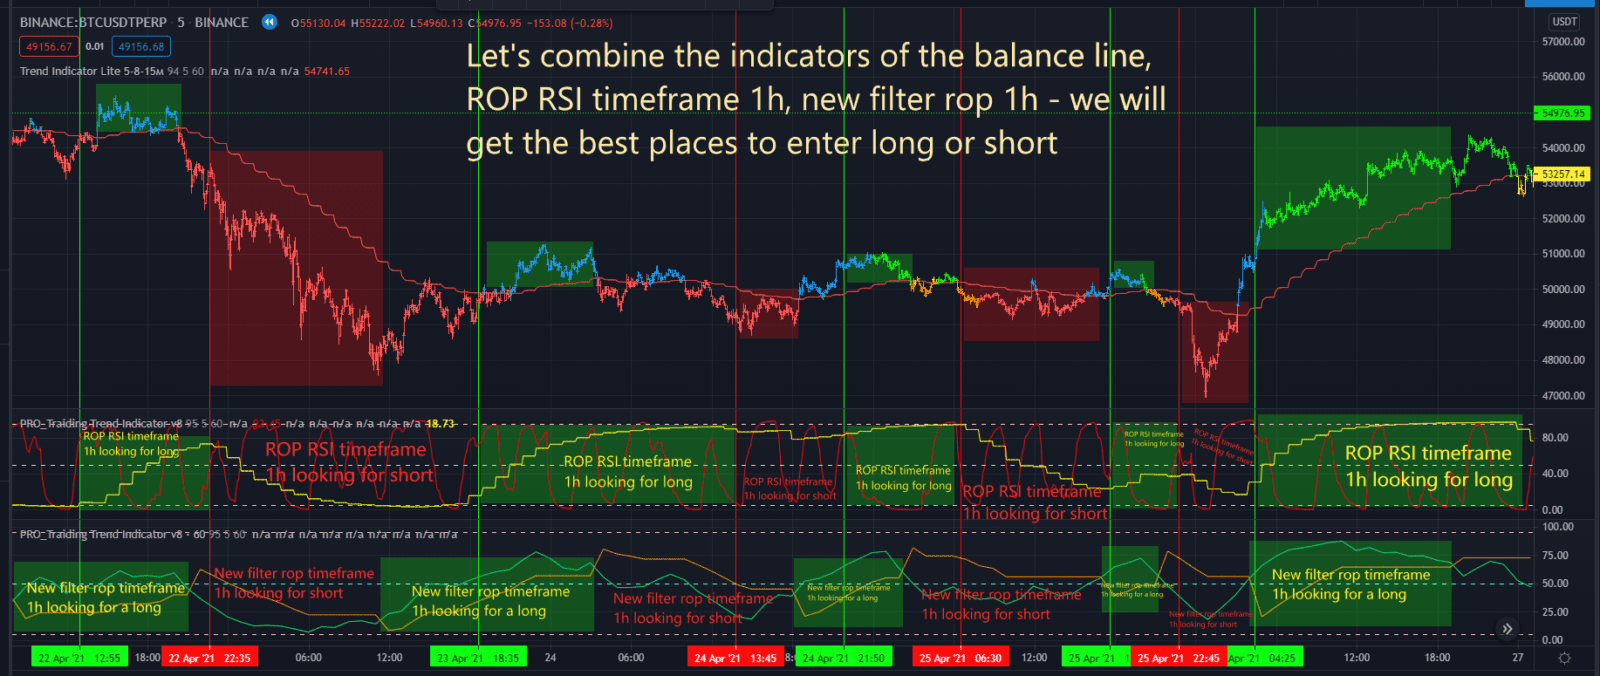 New trading strategy